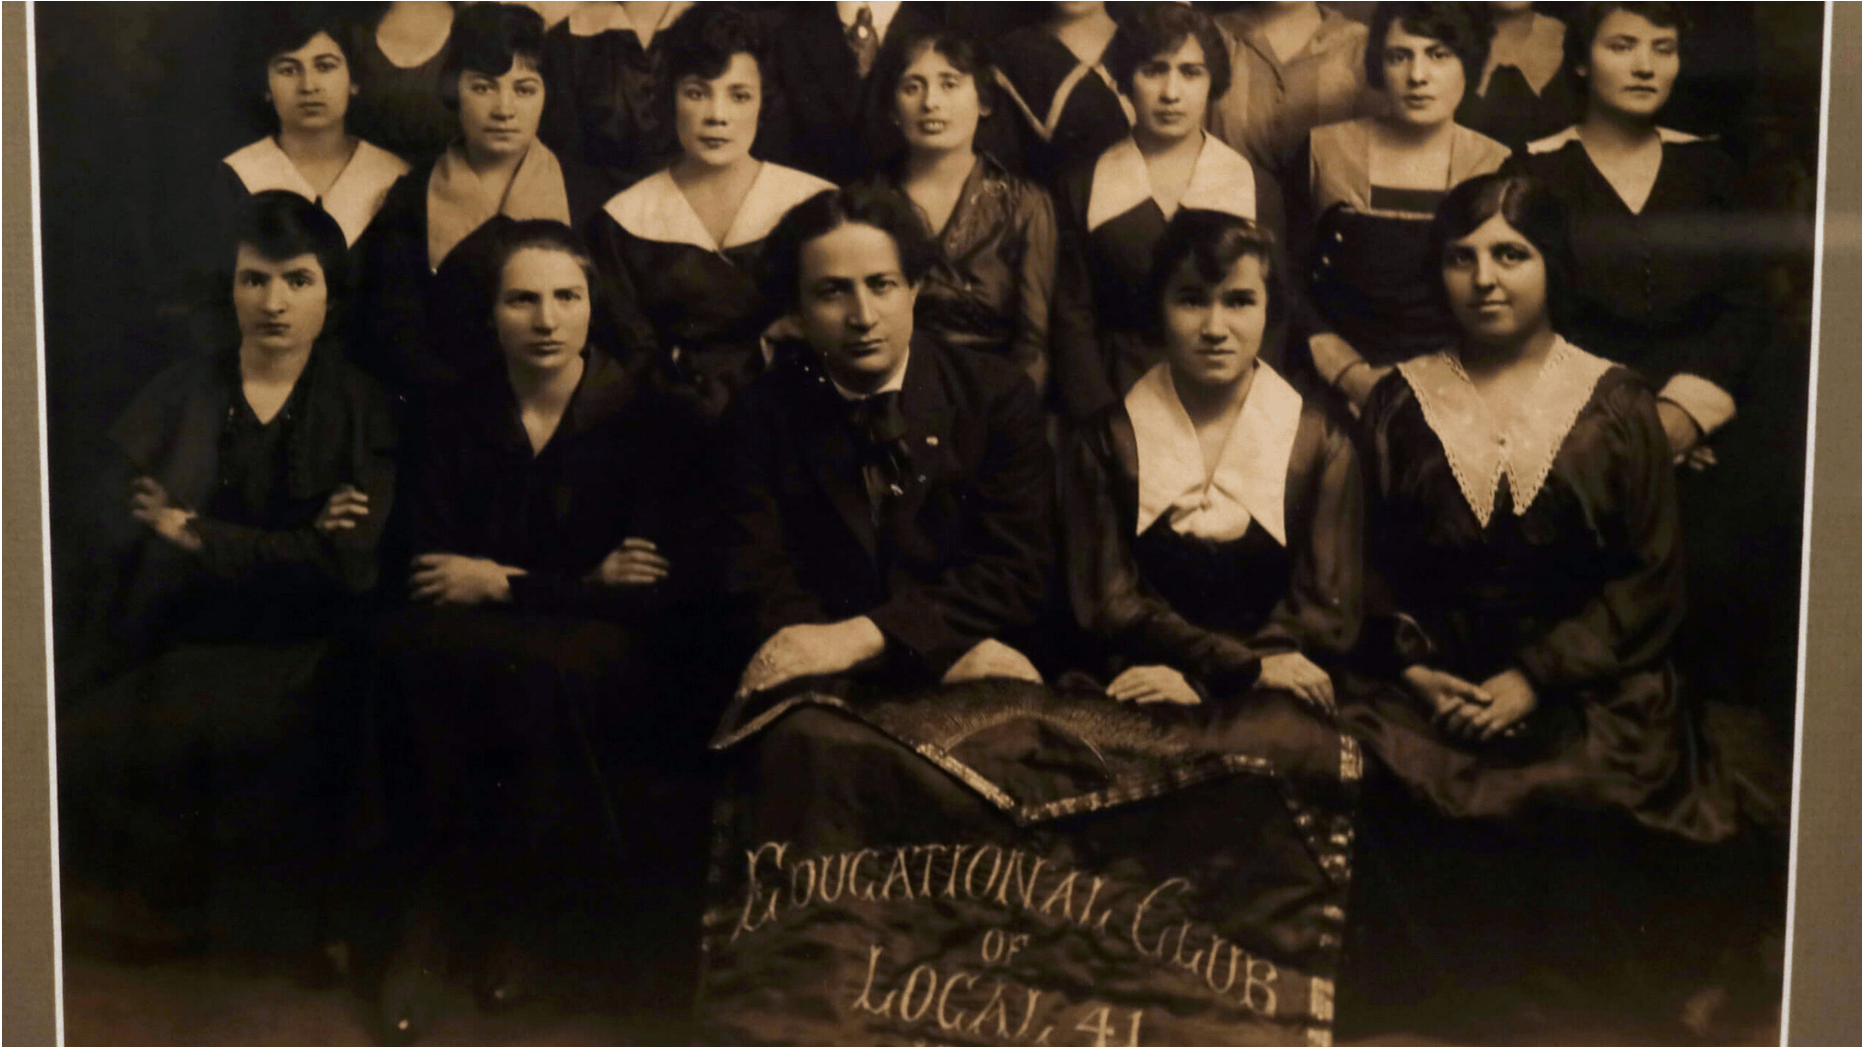 Jennifer Stern's grandmother (sitting, far right) with other members of her branch of the International Ladies Garment Workers Union, 1915